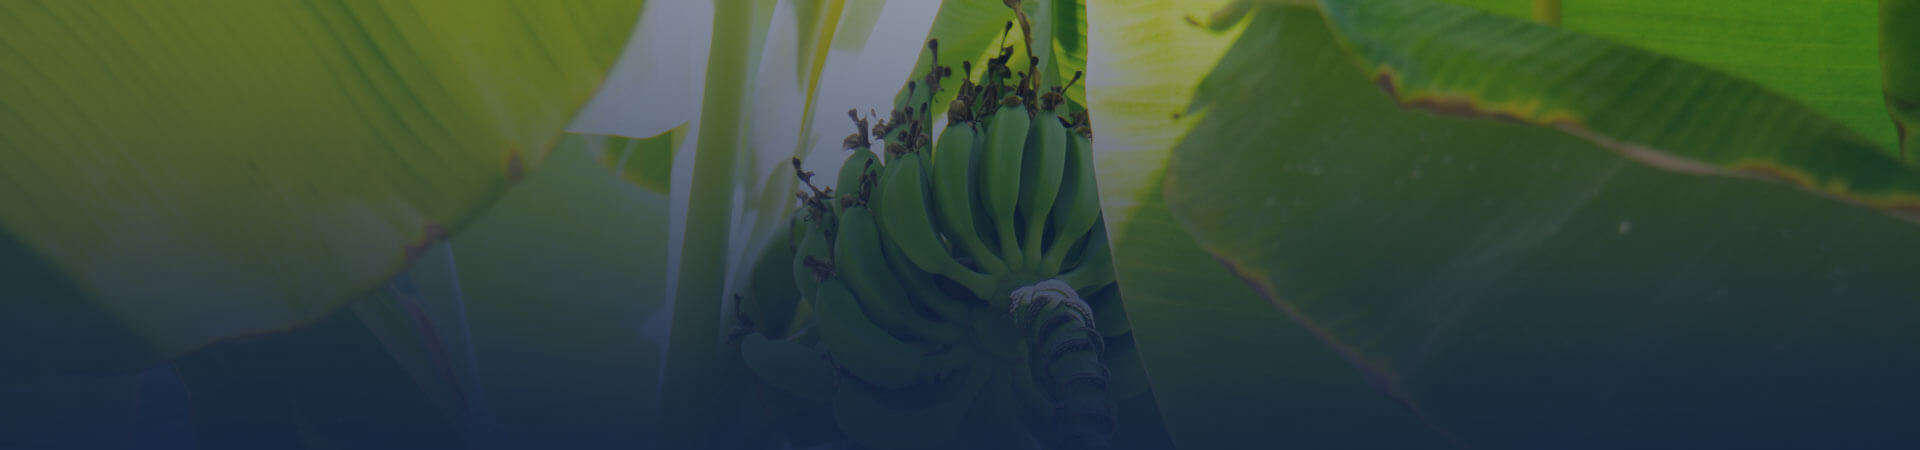 Departmental laboratory for plant health analyzes of herbaceous and banana plants